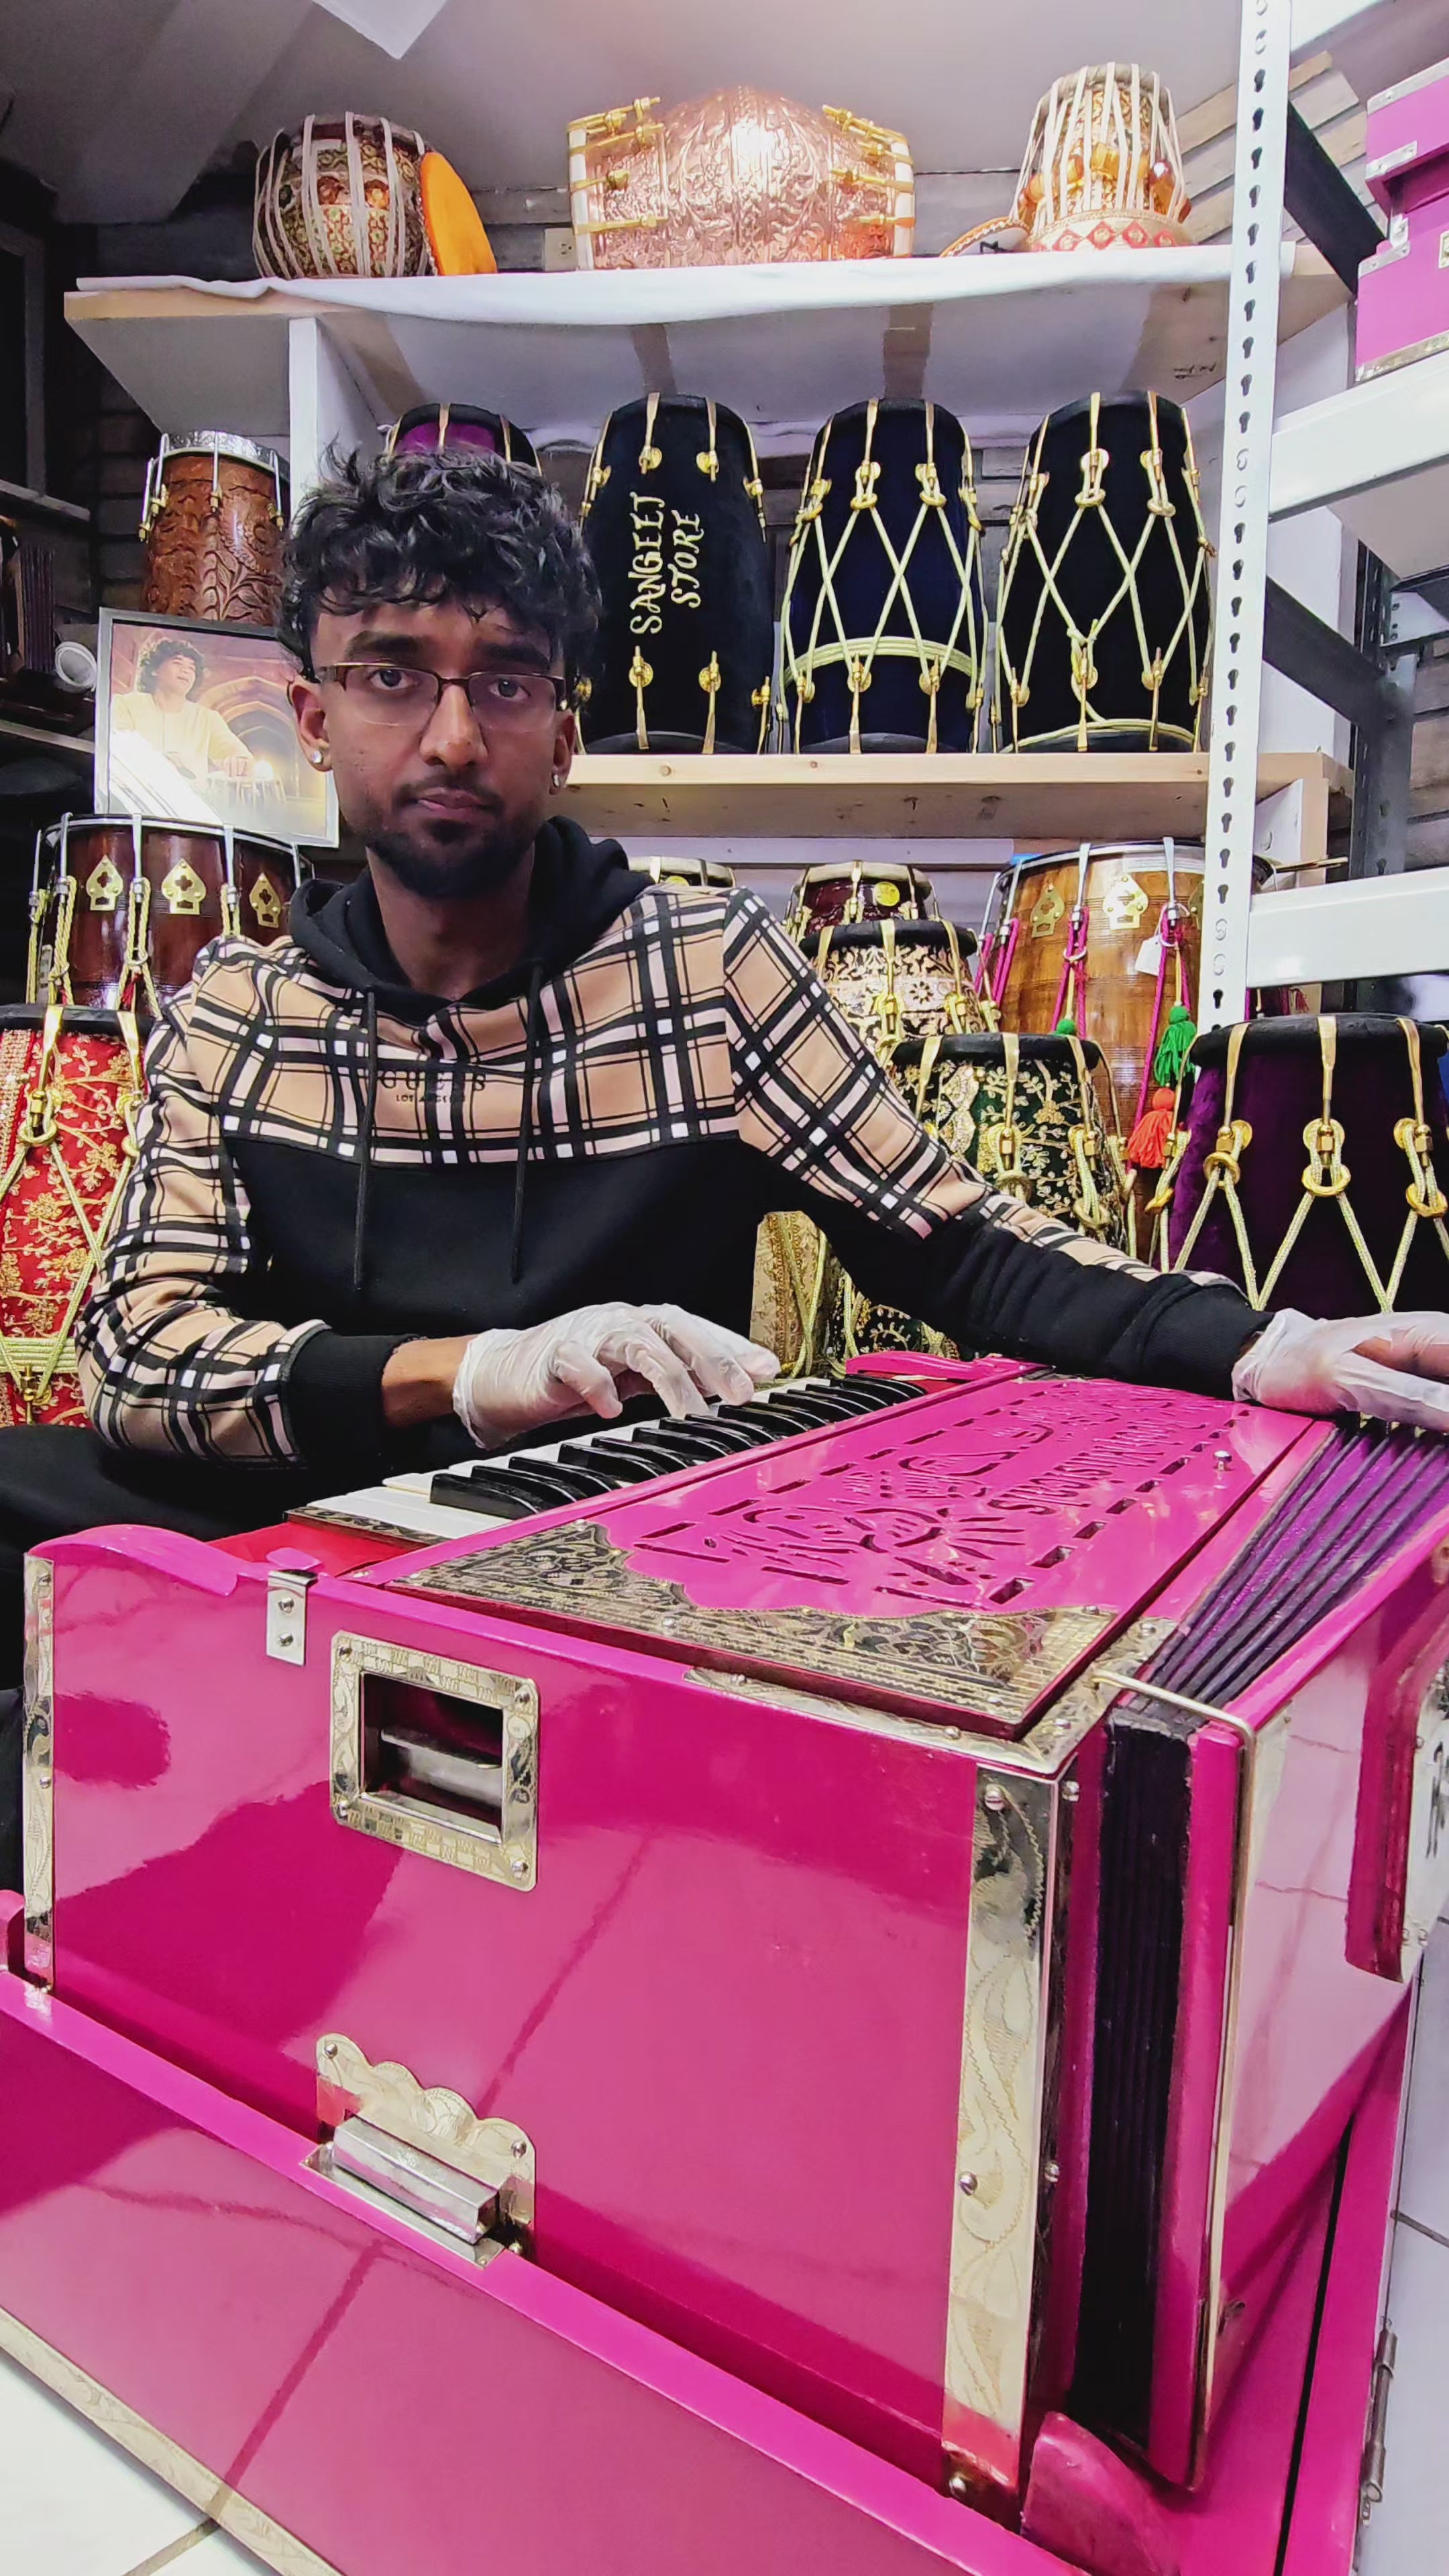 Vivid Harmonies: Bold Pink 4 Reed 13 Scale-Changer Harmonium with Cosmetic Defects